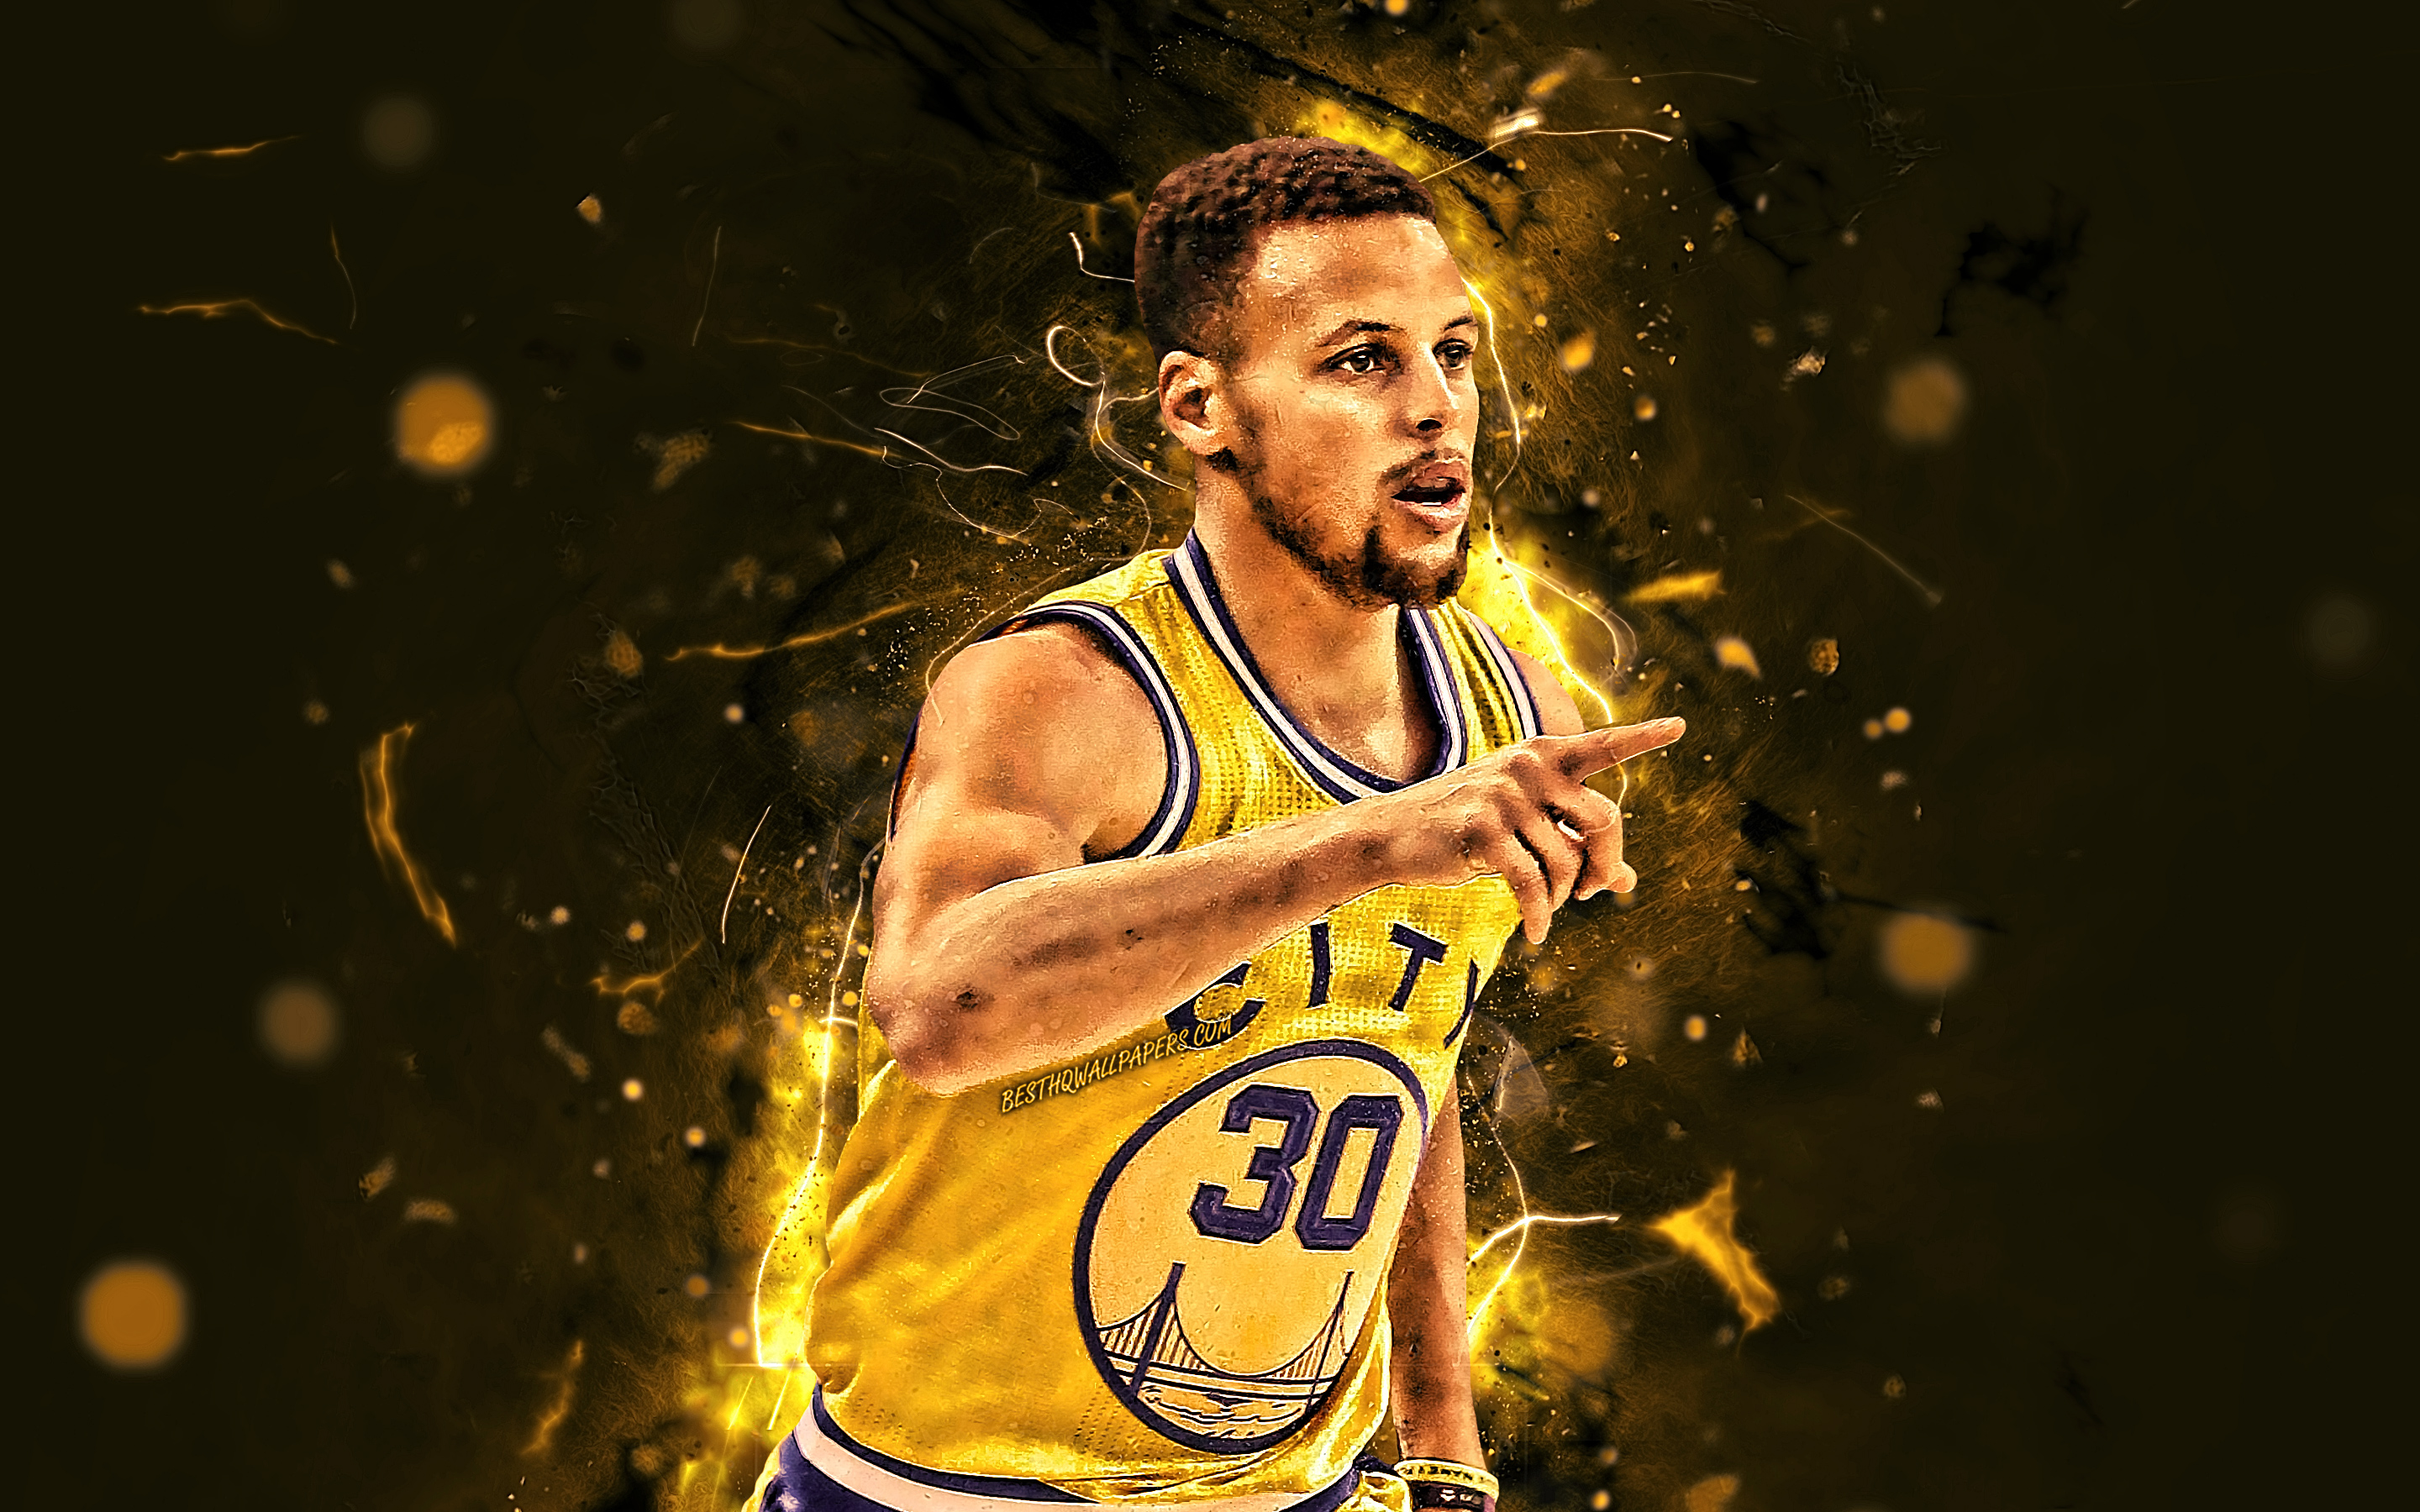 Download wallpaper Steph Curry, yellow uniform, Golden State Warriors, basketball stars, NBA, Stephen Curry, basketball, neon lights, creative for desktop with resolution 2880x1800. High Quality HD picture wallpaper